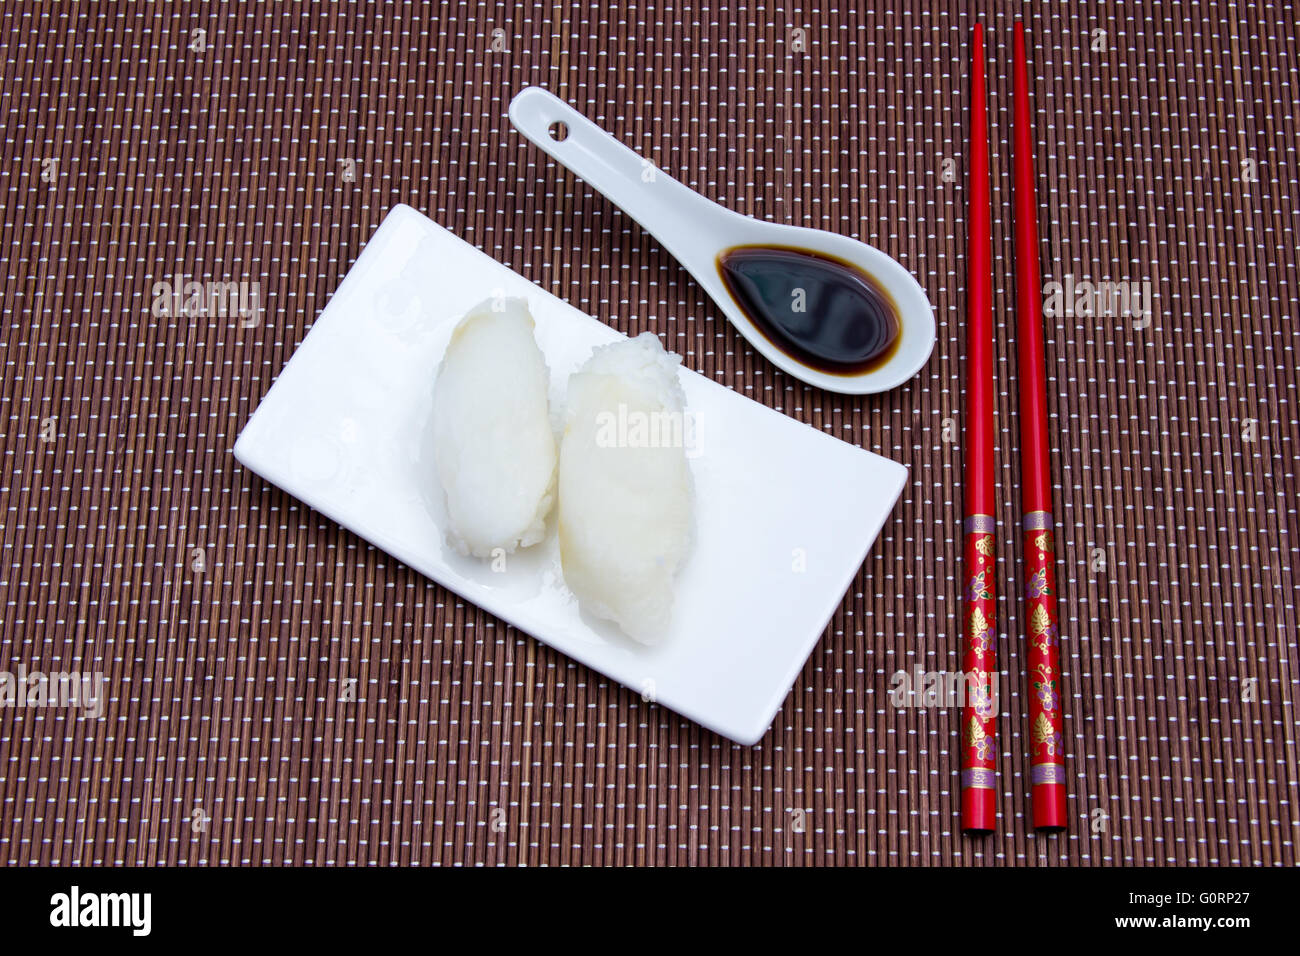 Nigiri with halibut on a placemat bamboo seen from above Stock Photo